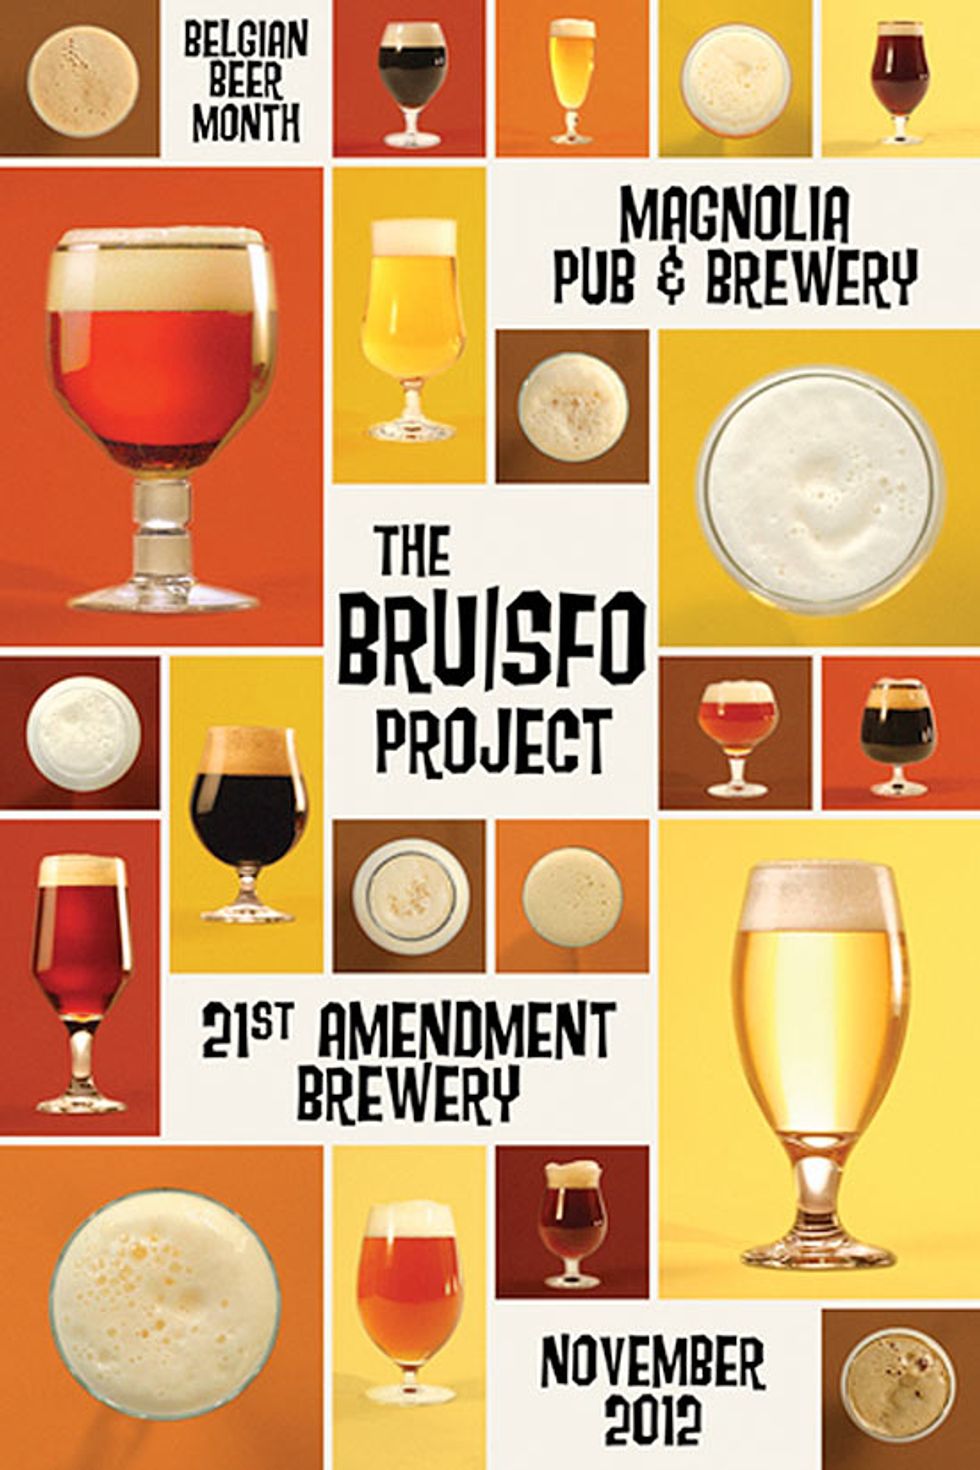 An Entire Month of Belgian Beer? It's Happening at the BRU/SFO Project and C2CT2